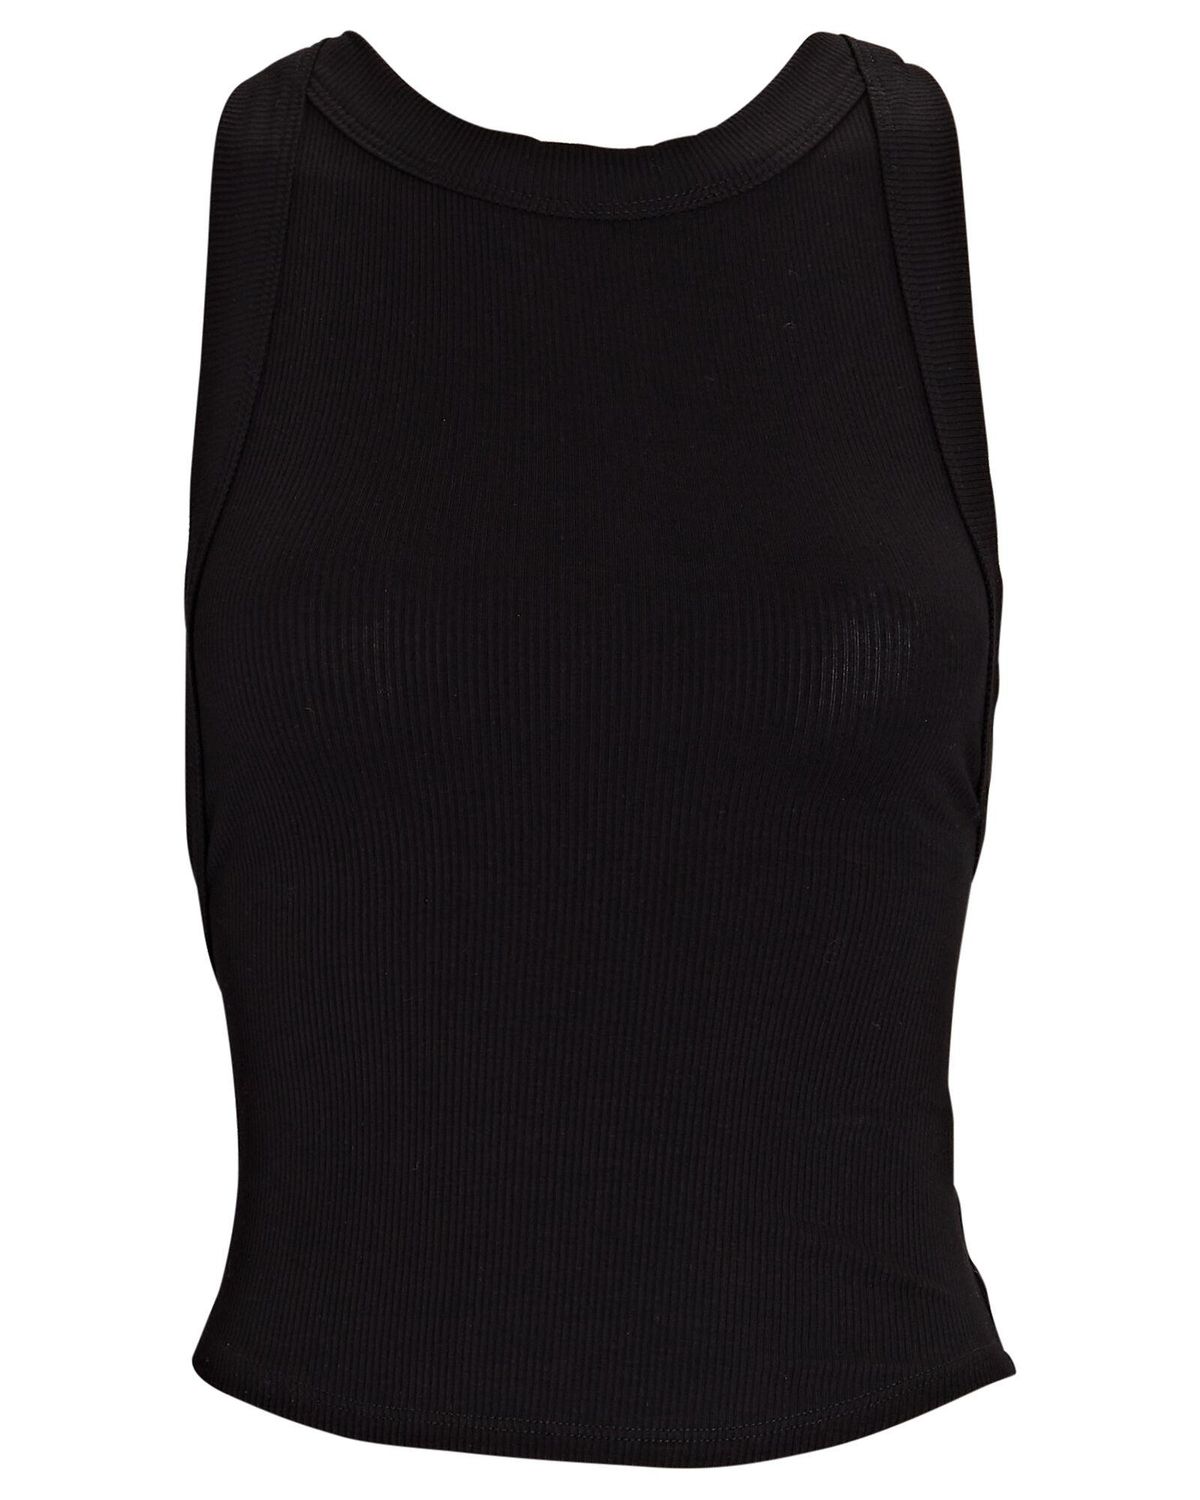 the line by k ximeno high neck tank top